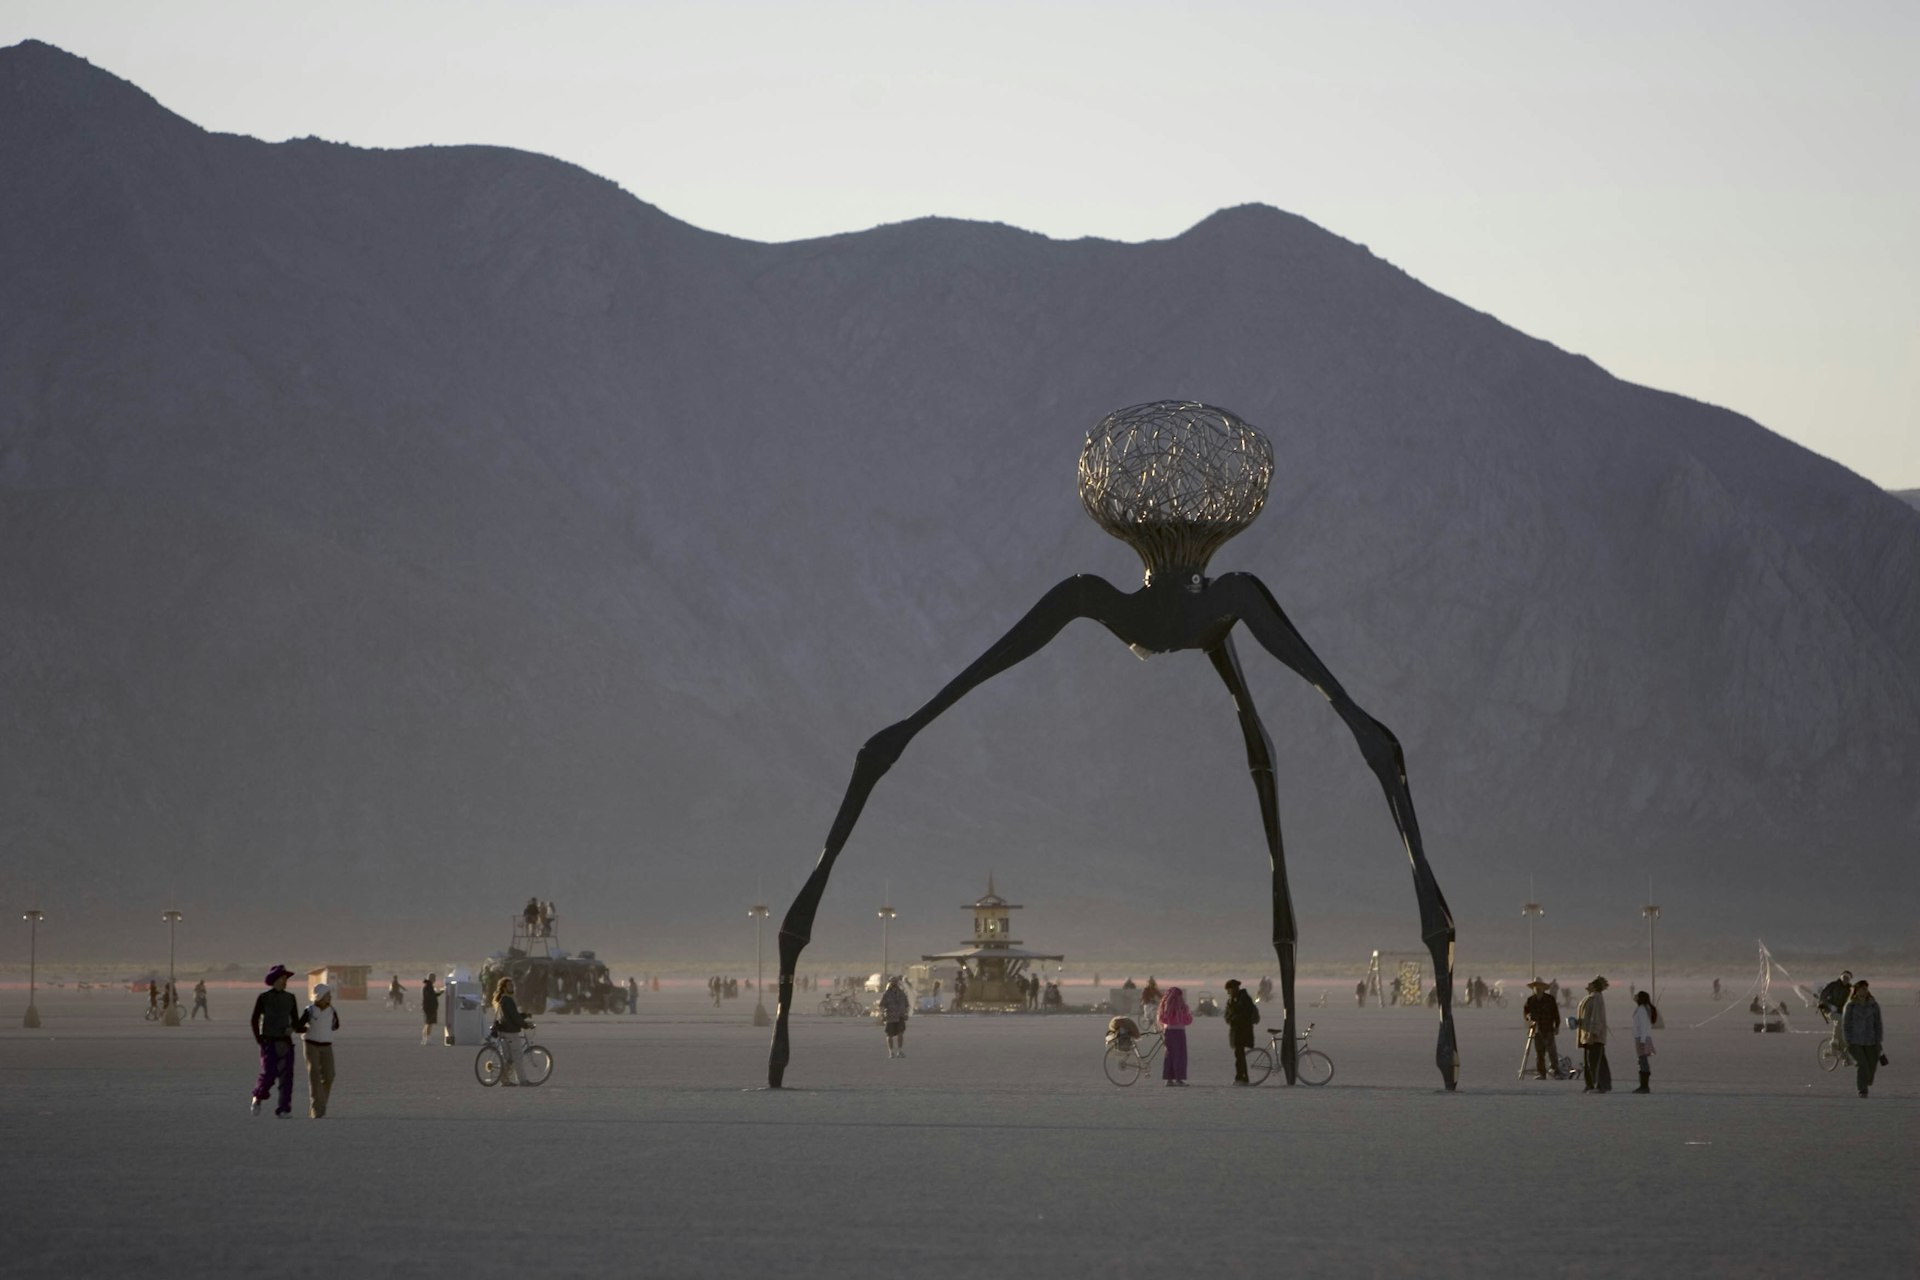 An art structure on the Playa of the Burning Man Festival